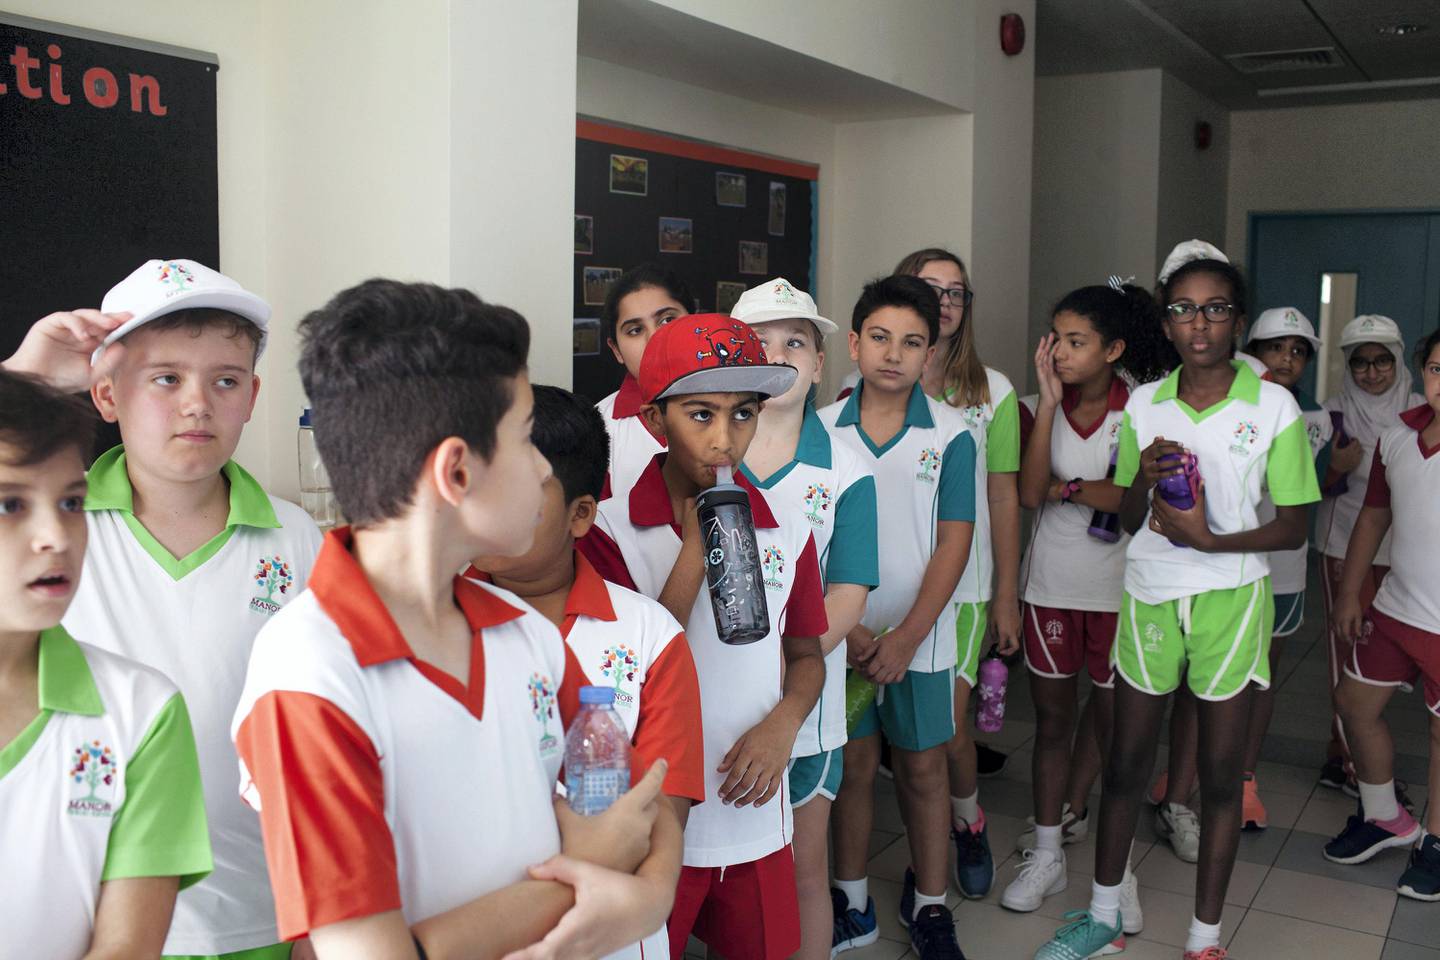 06.09.17. Manor Primary School in Dubai has recently implementing a fitness programme for all pupils aged 4-10 to walk a mile a day as well as play breaks in-between classes. The teachers  at the school were shocked at how unfit the kids were. They have also encouraged healthy snack breaks during the day.Anna Nielsen For The National.